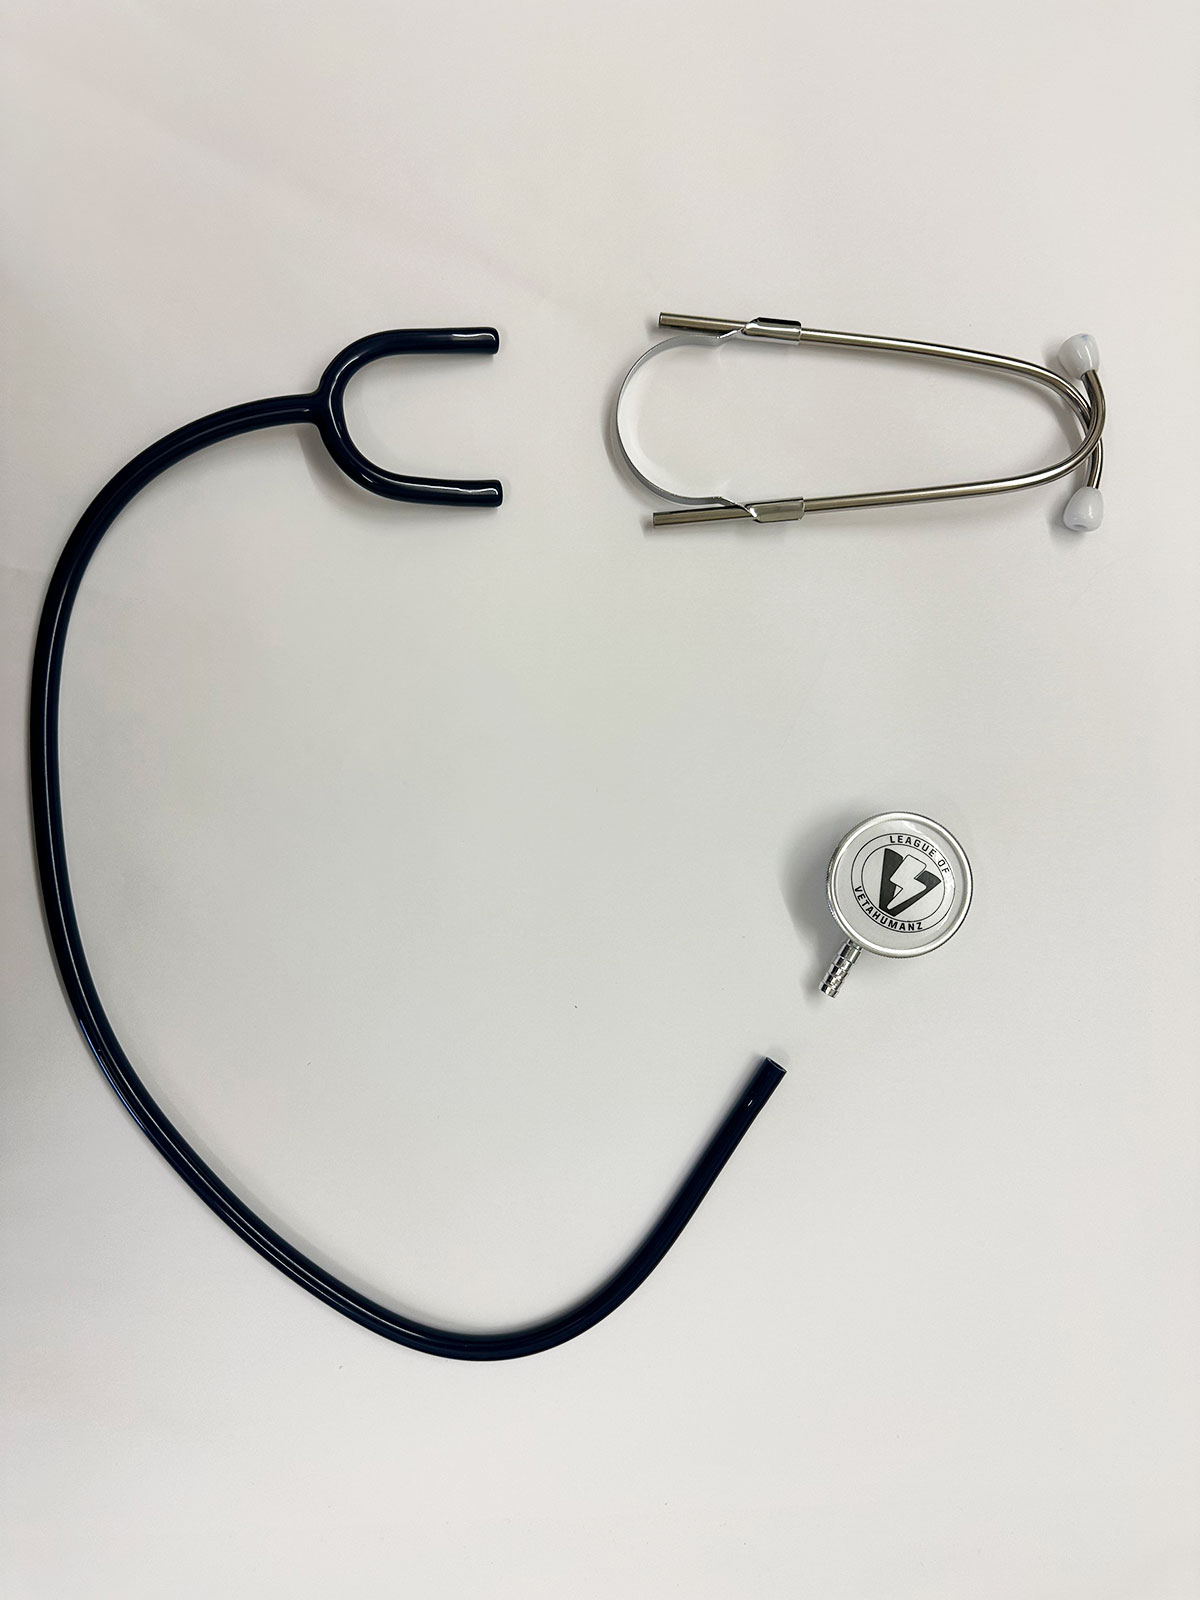 3 pieces of the stethoscope to assemble